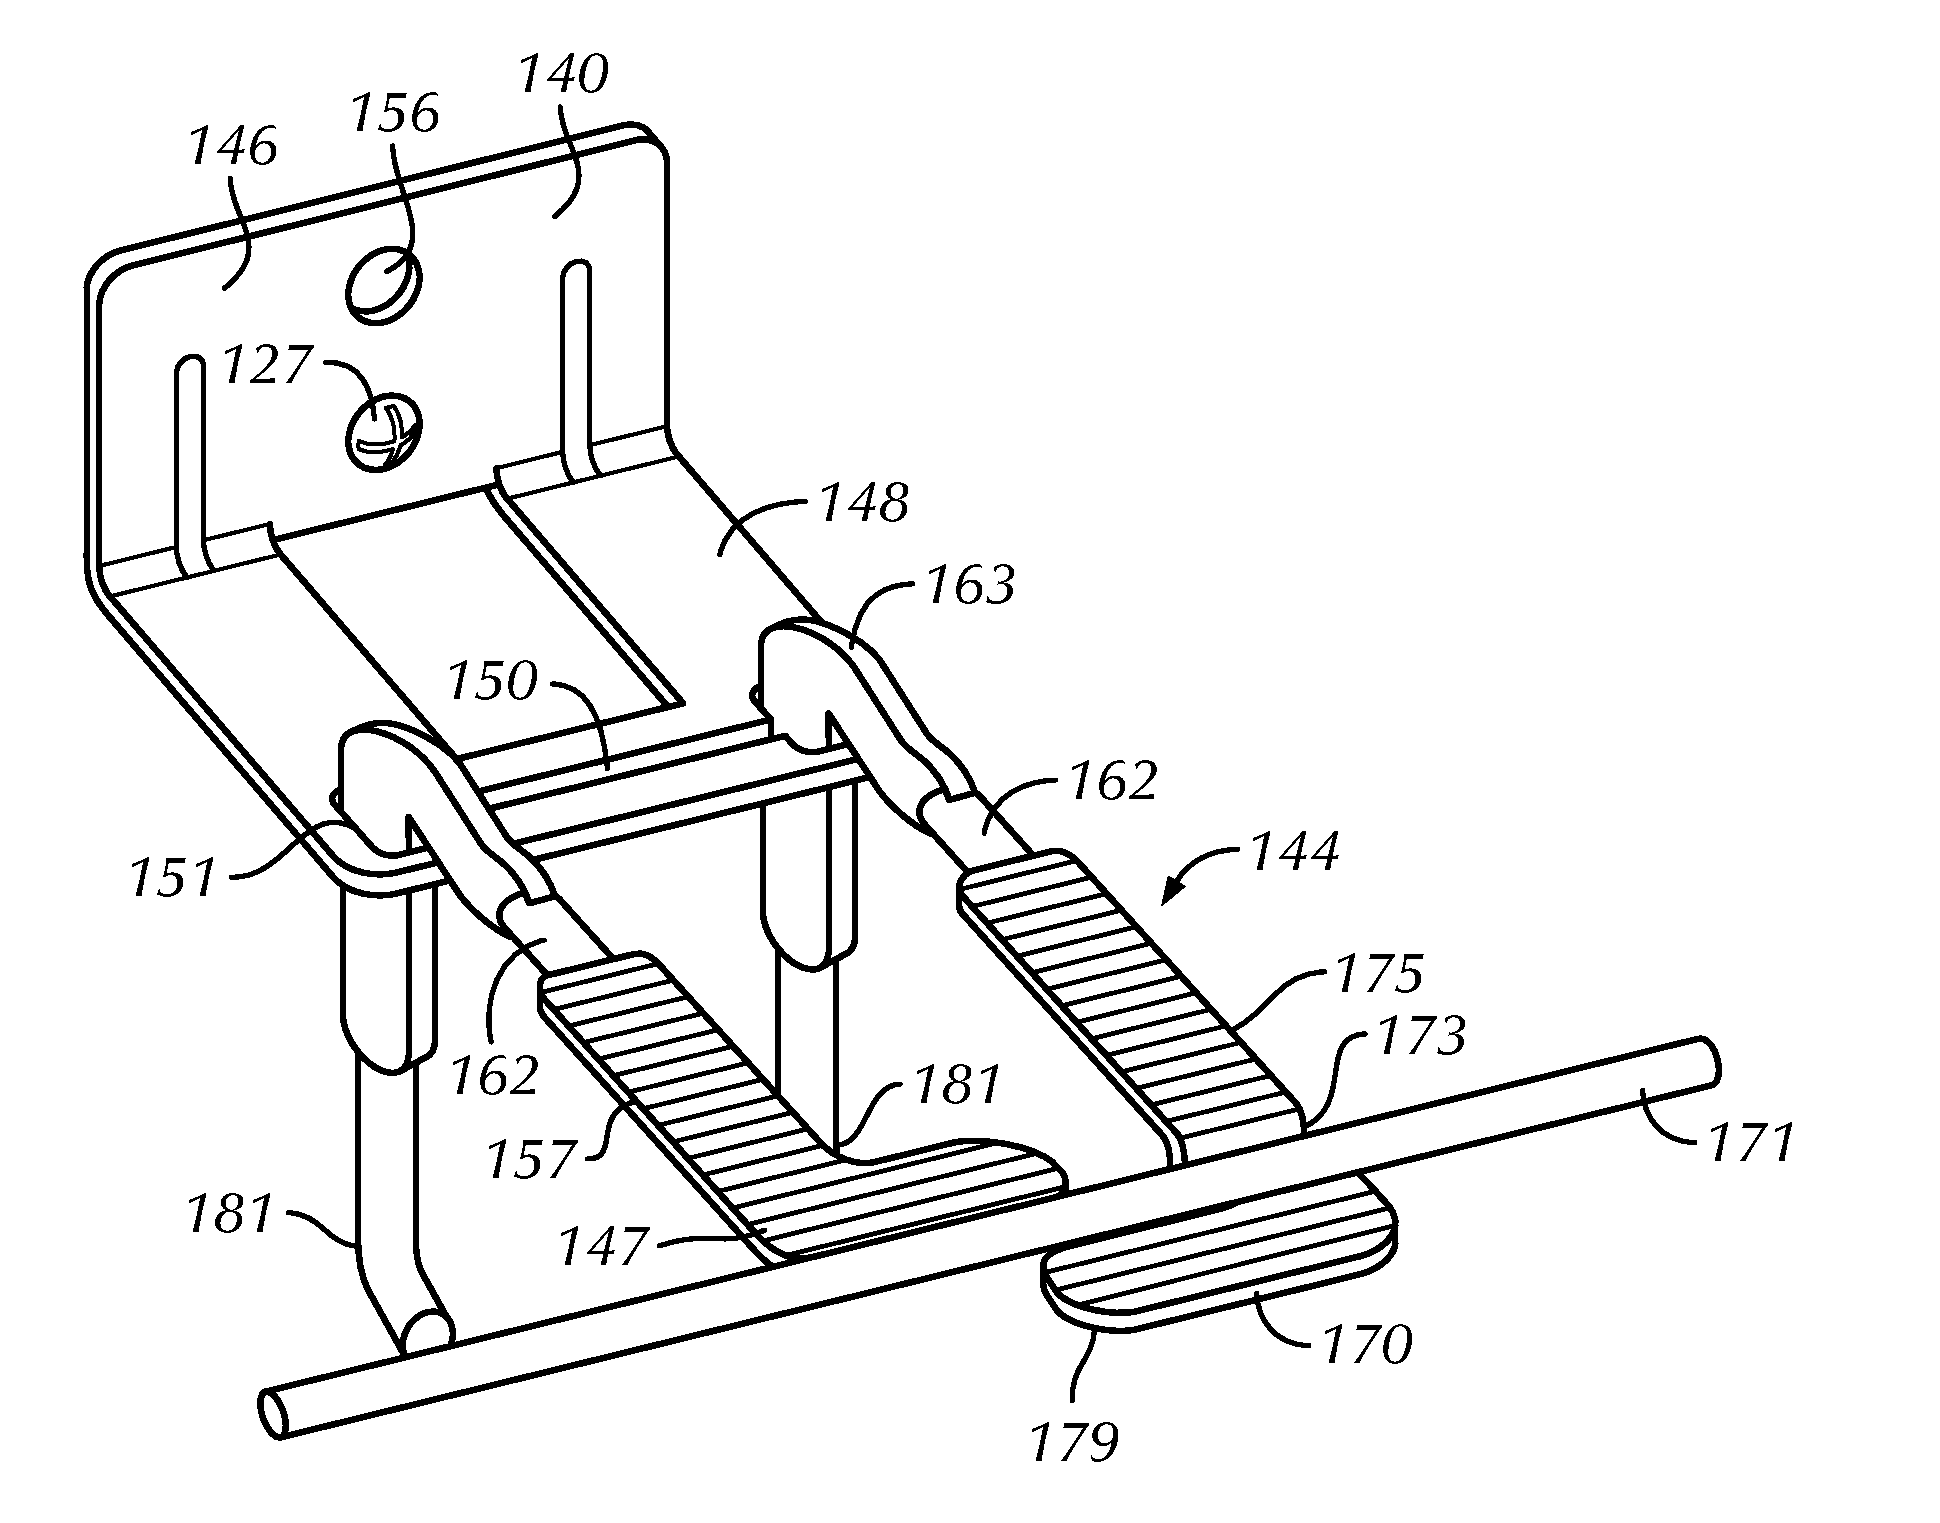 High-strength partially compressed low profile veneer tie and anchoring system utilizing the same